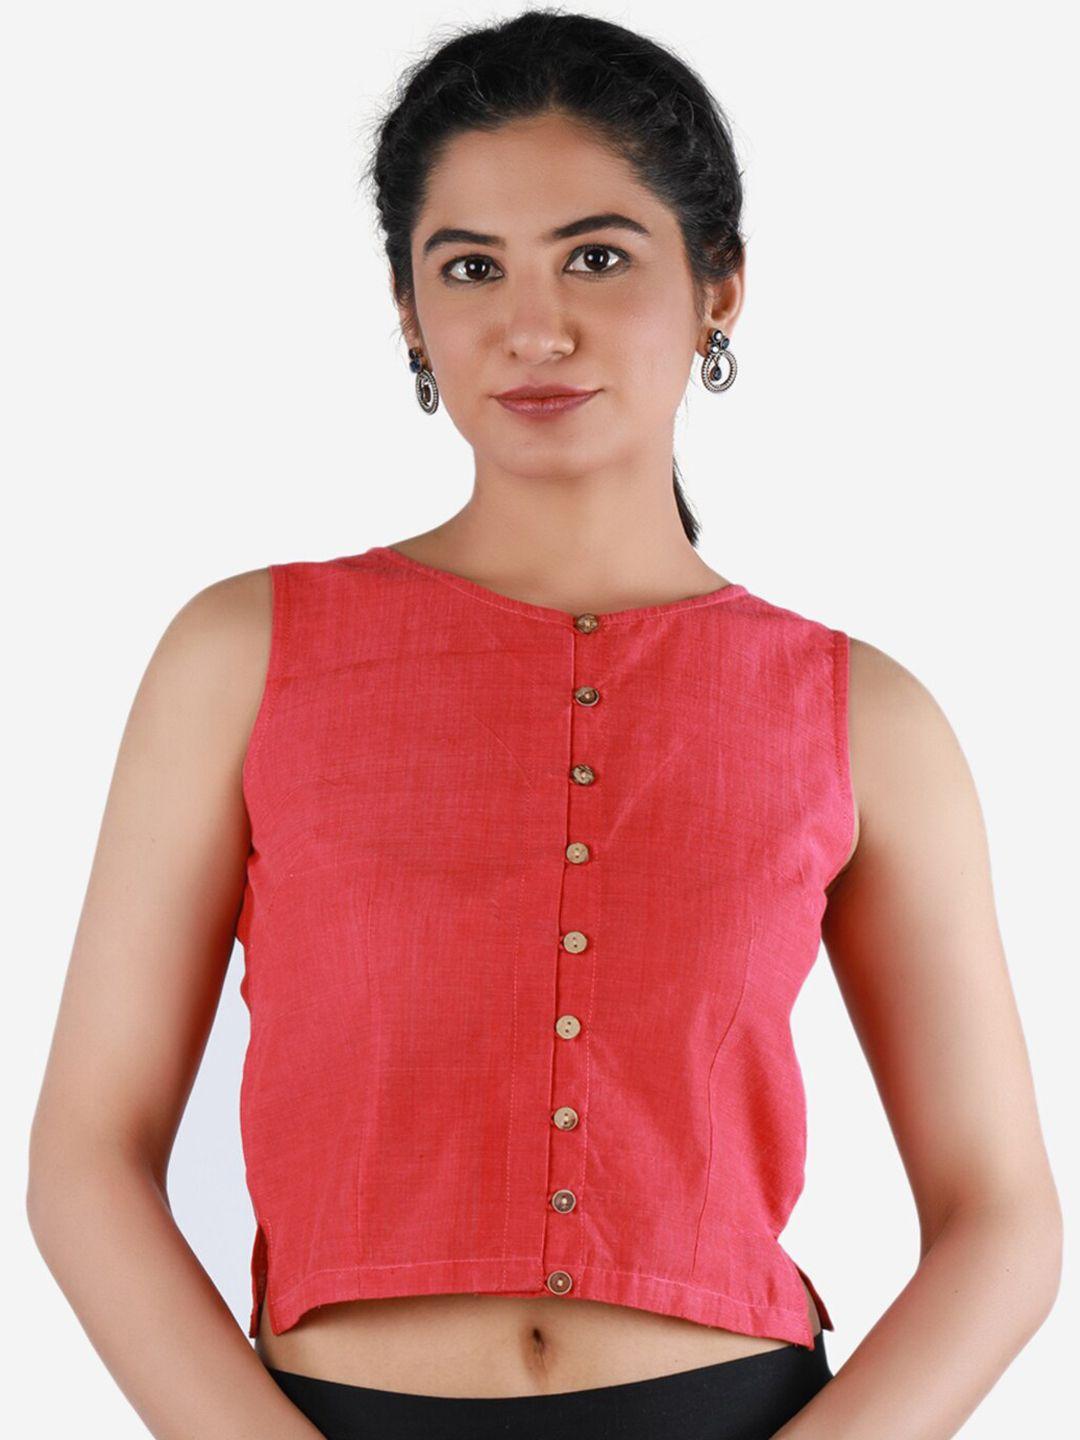 llajja-women-red-solid-pure-cotton-saree-blouse